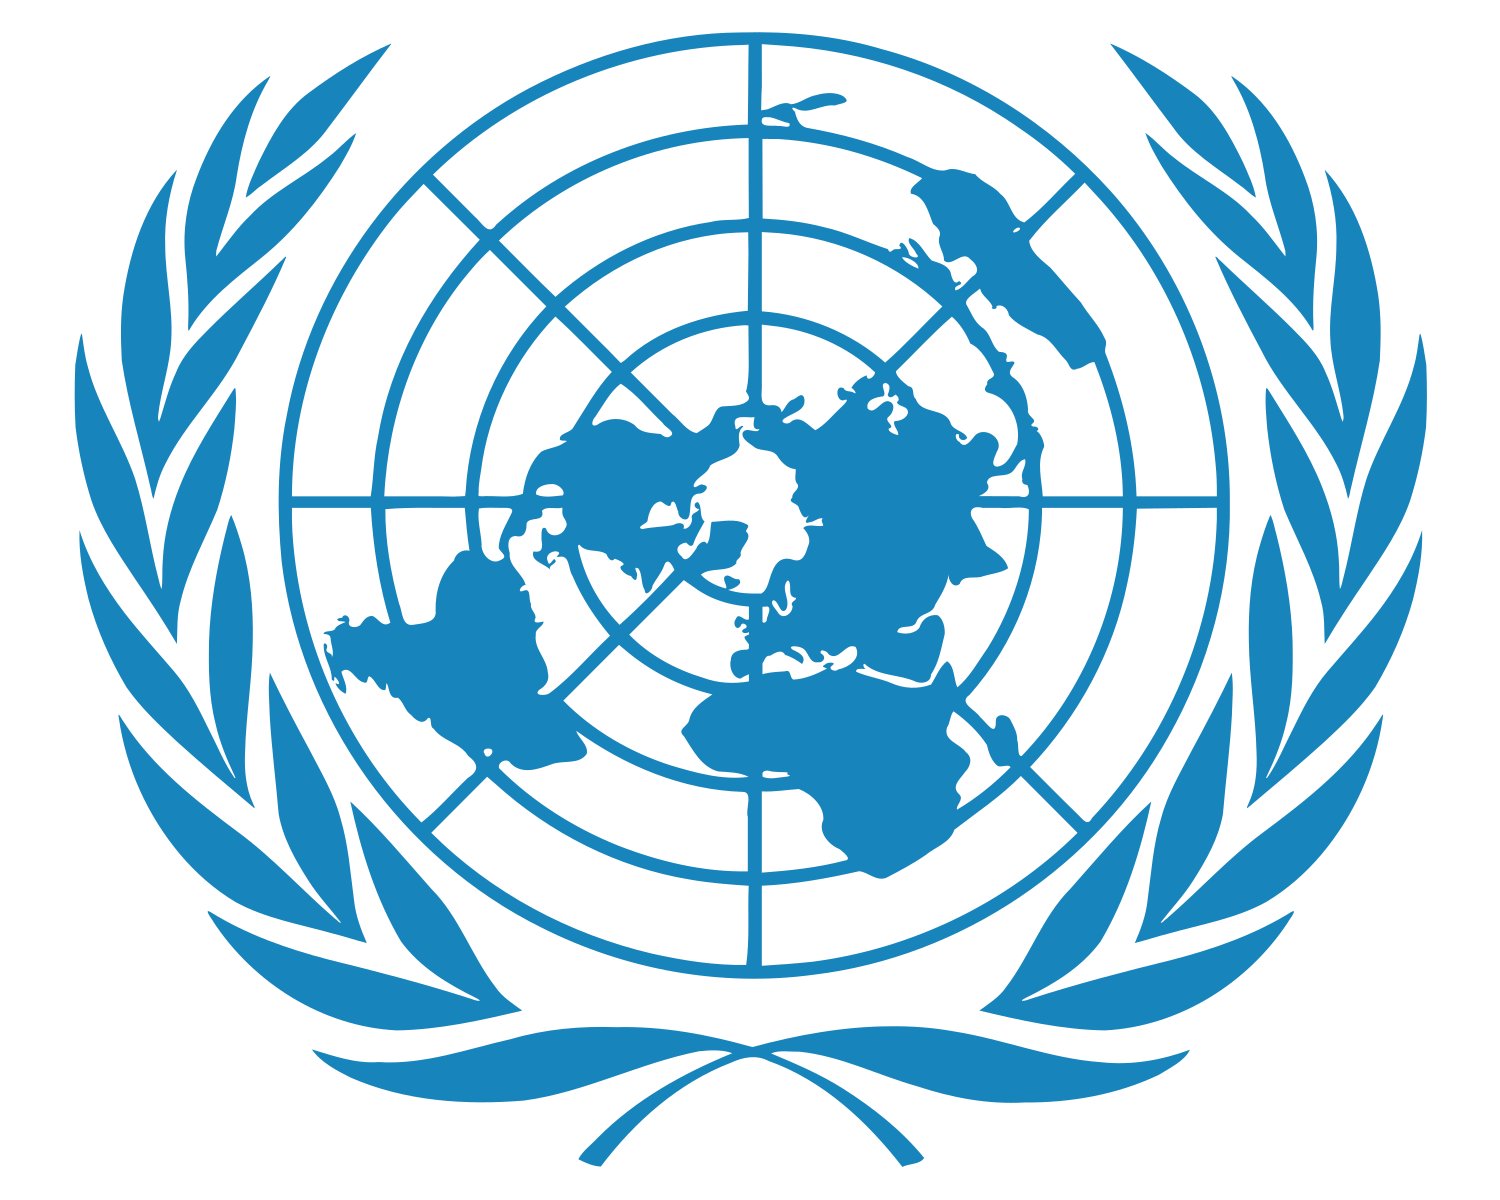 UN is a global institution